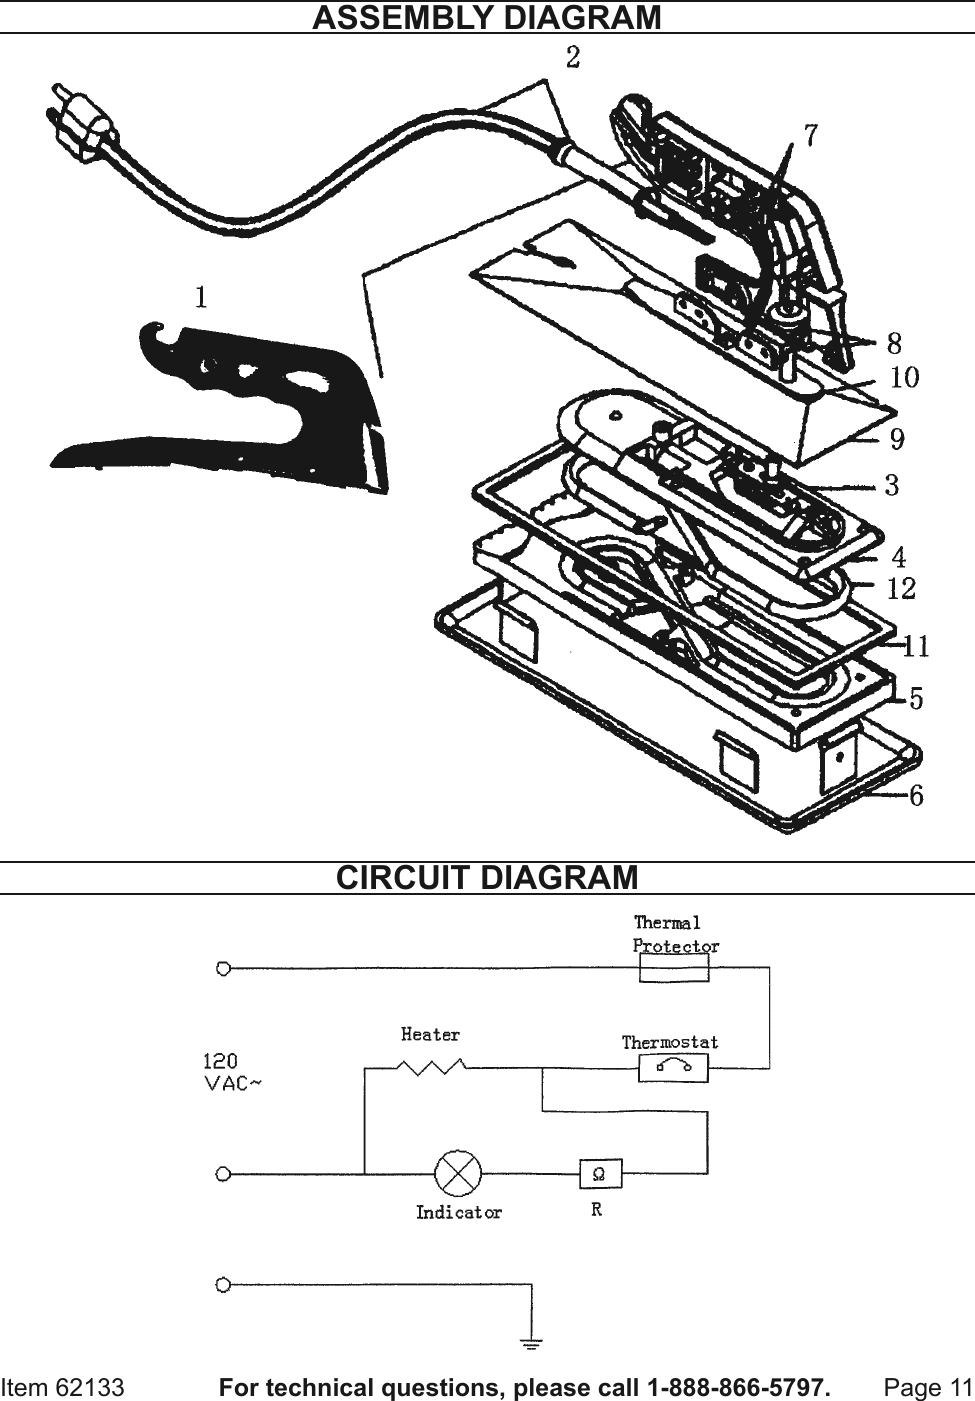 Page 11 of 12 - Harbor-Freight Harbor-Freight-Heat-Bond-Carpet-Seaming-Iron-Product-Manual-  Harbor-freight-heat-bond-carpet-seaming-iron-product-manual